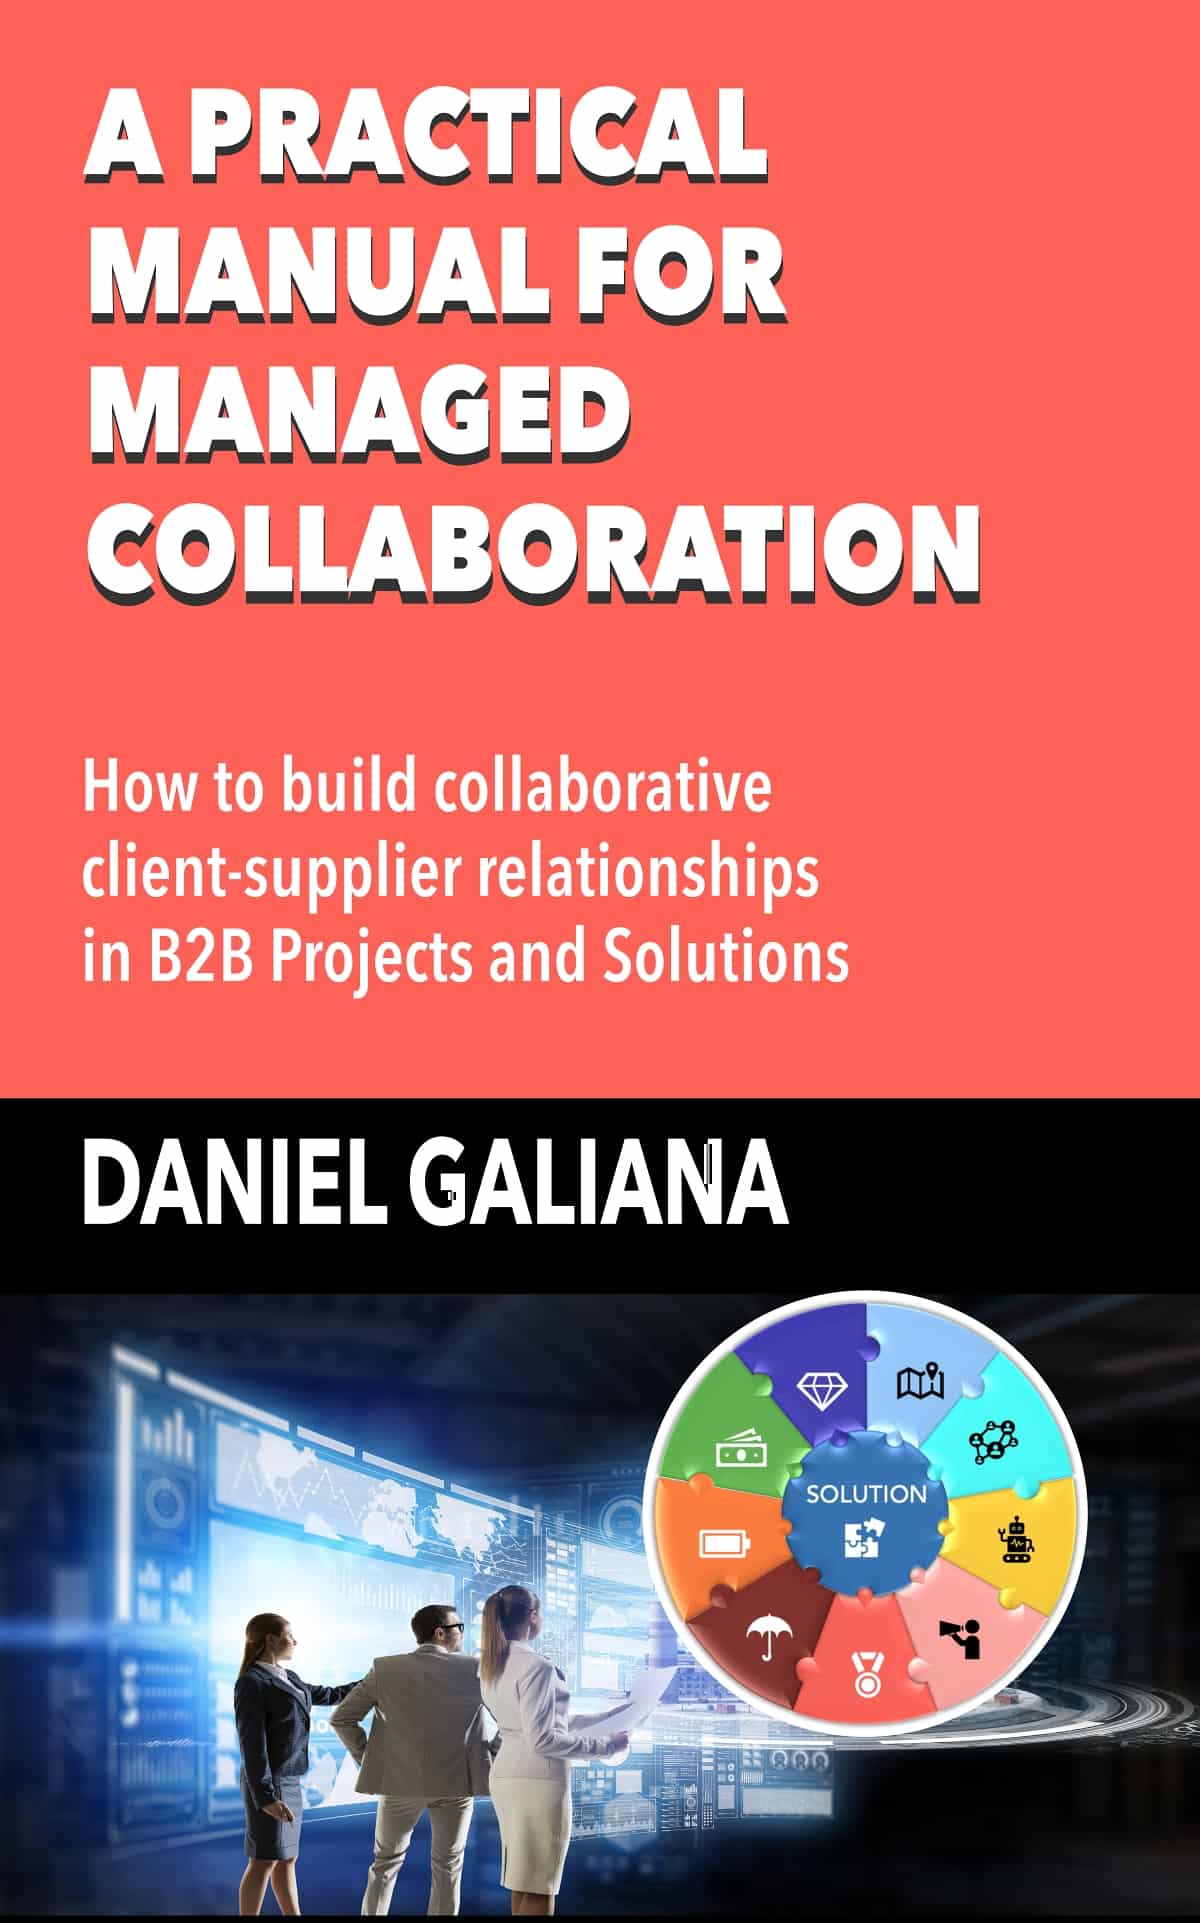 A practical manual for Managed Collaboration_by Daniel Galiana